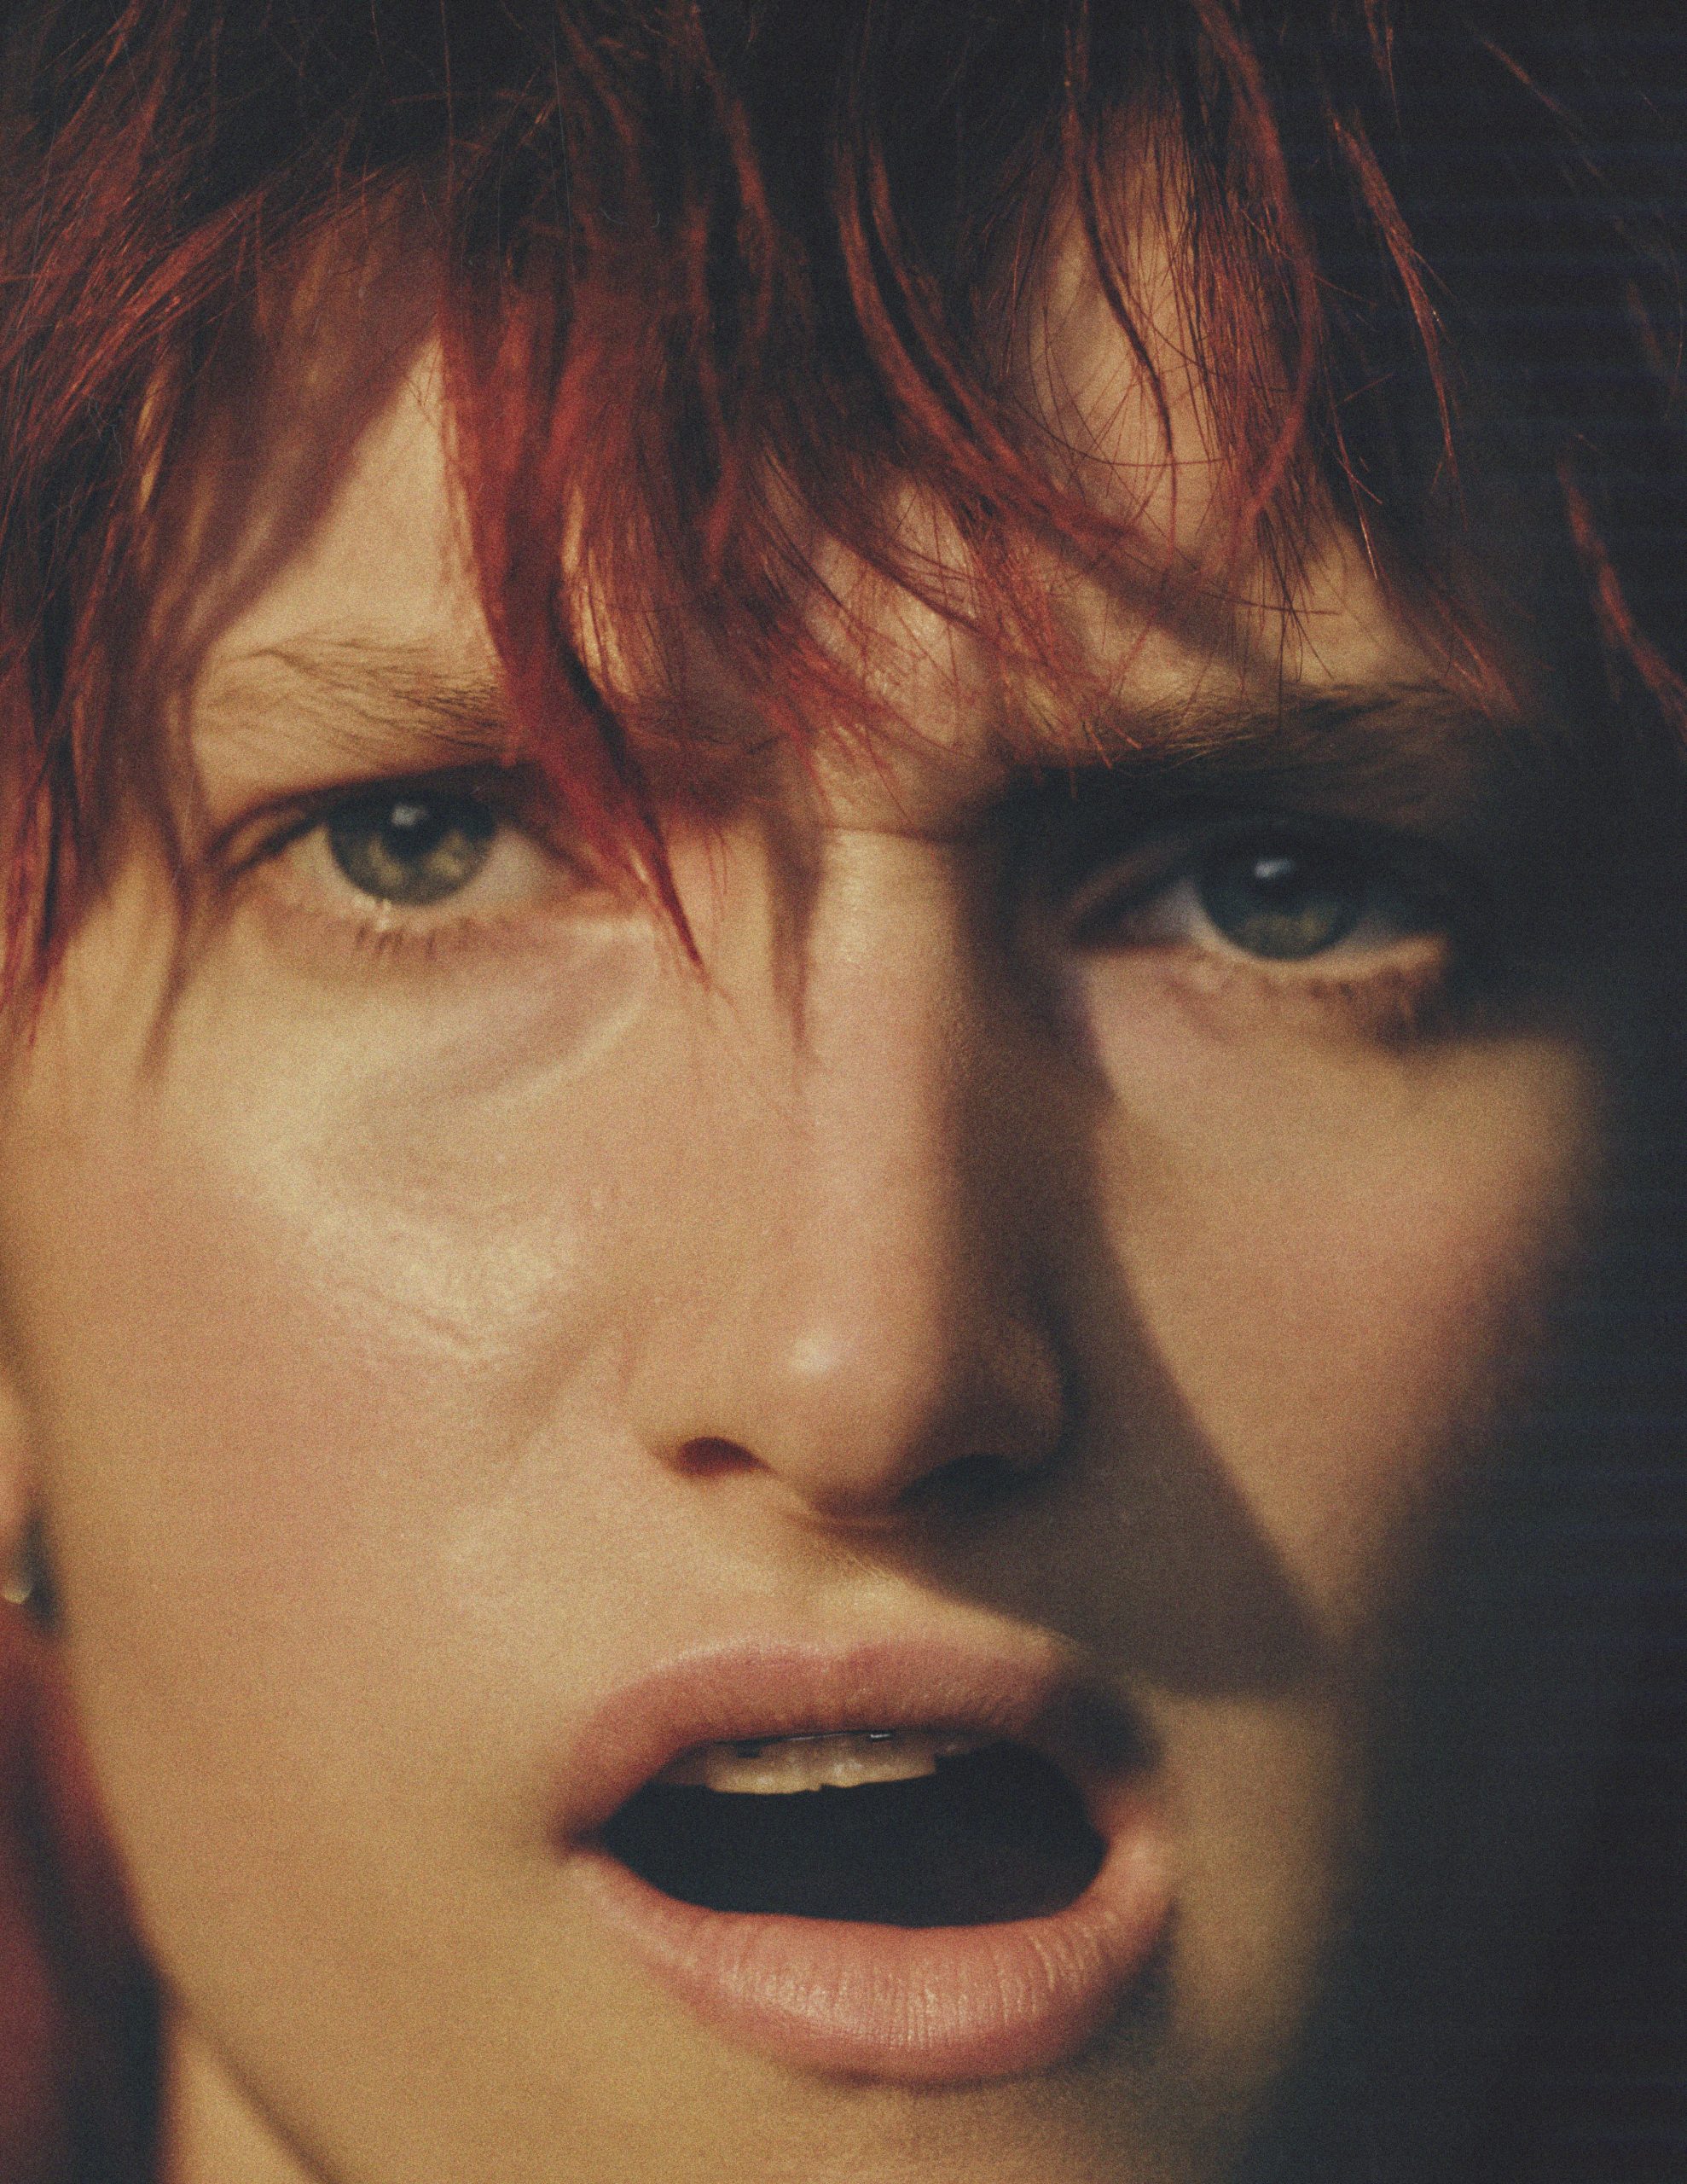 woman with open mound and red bangs